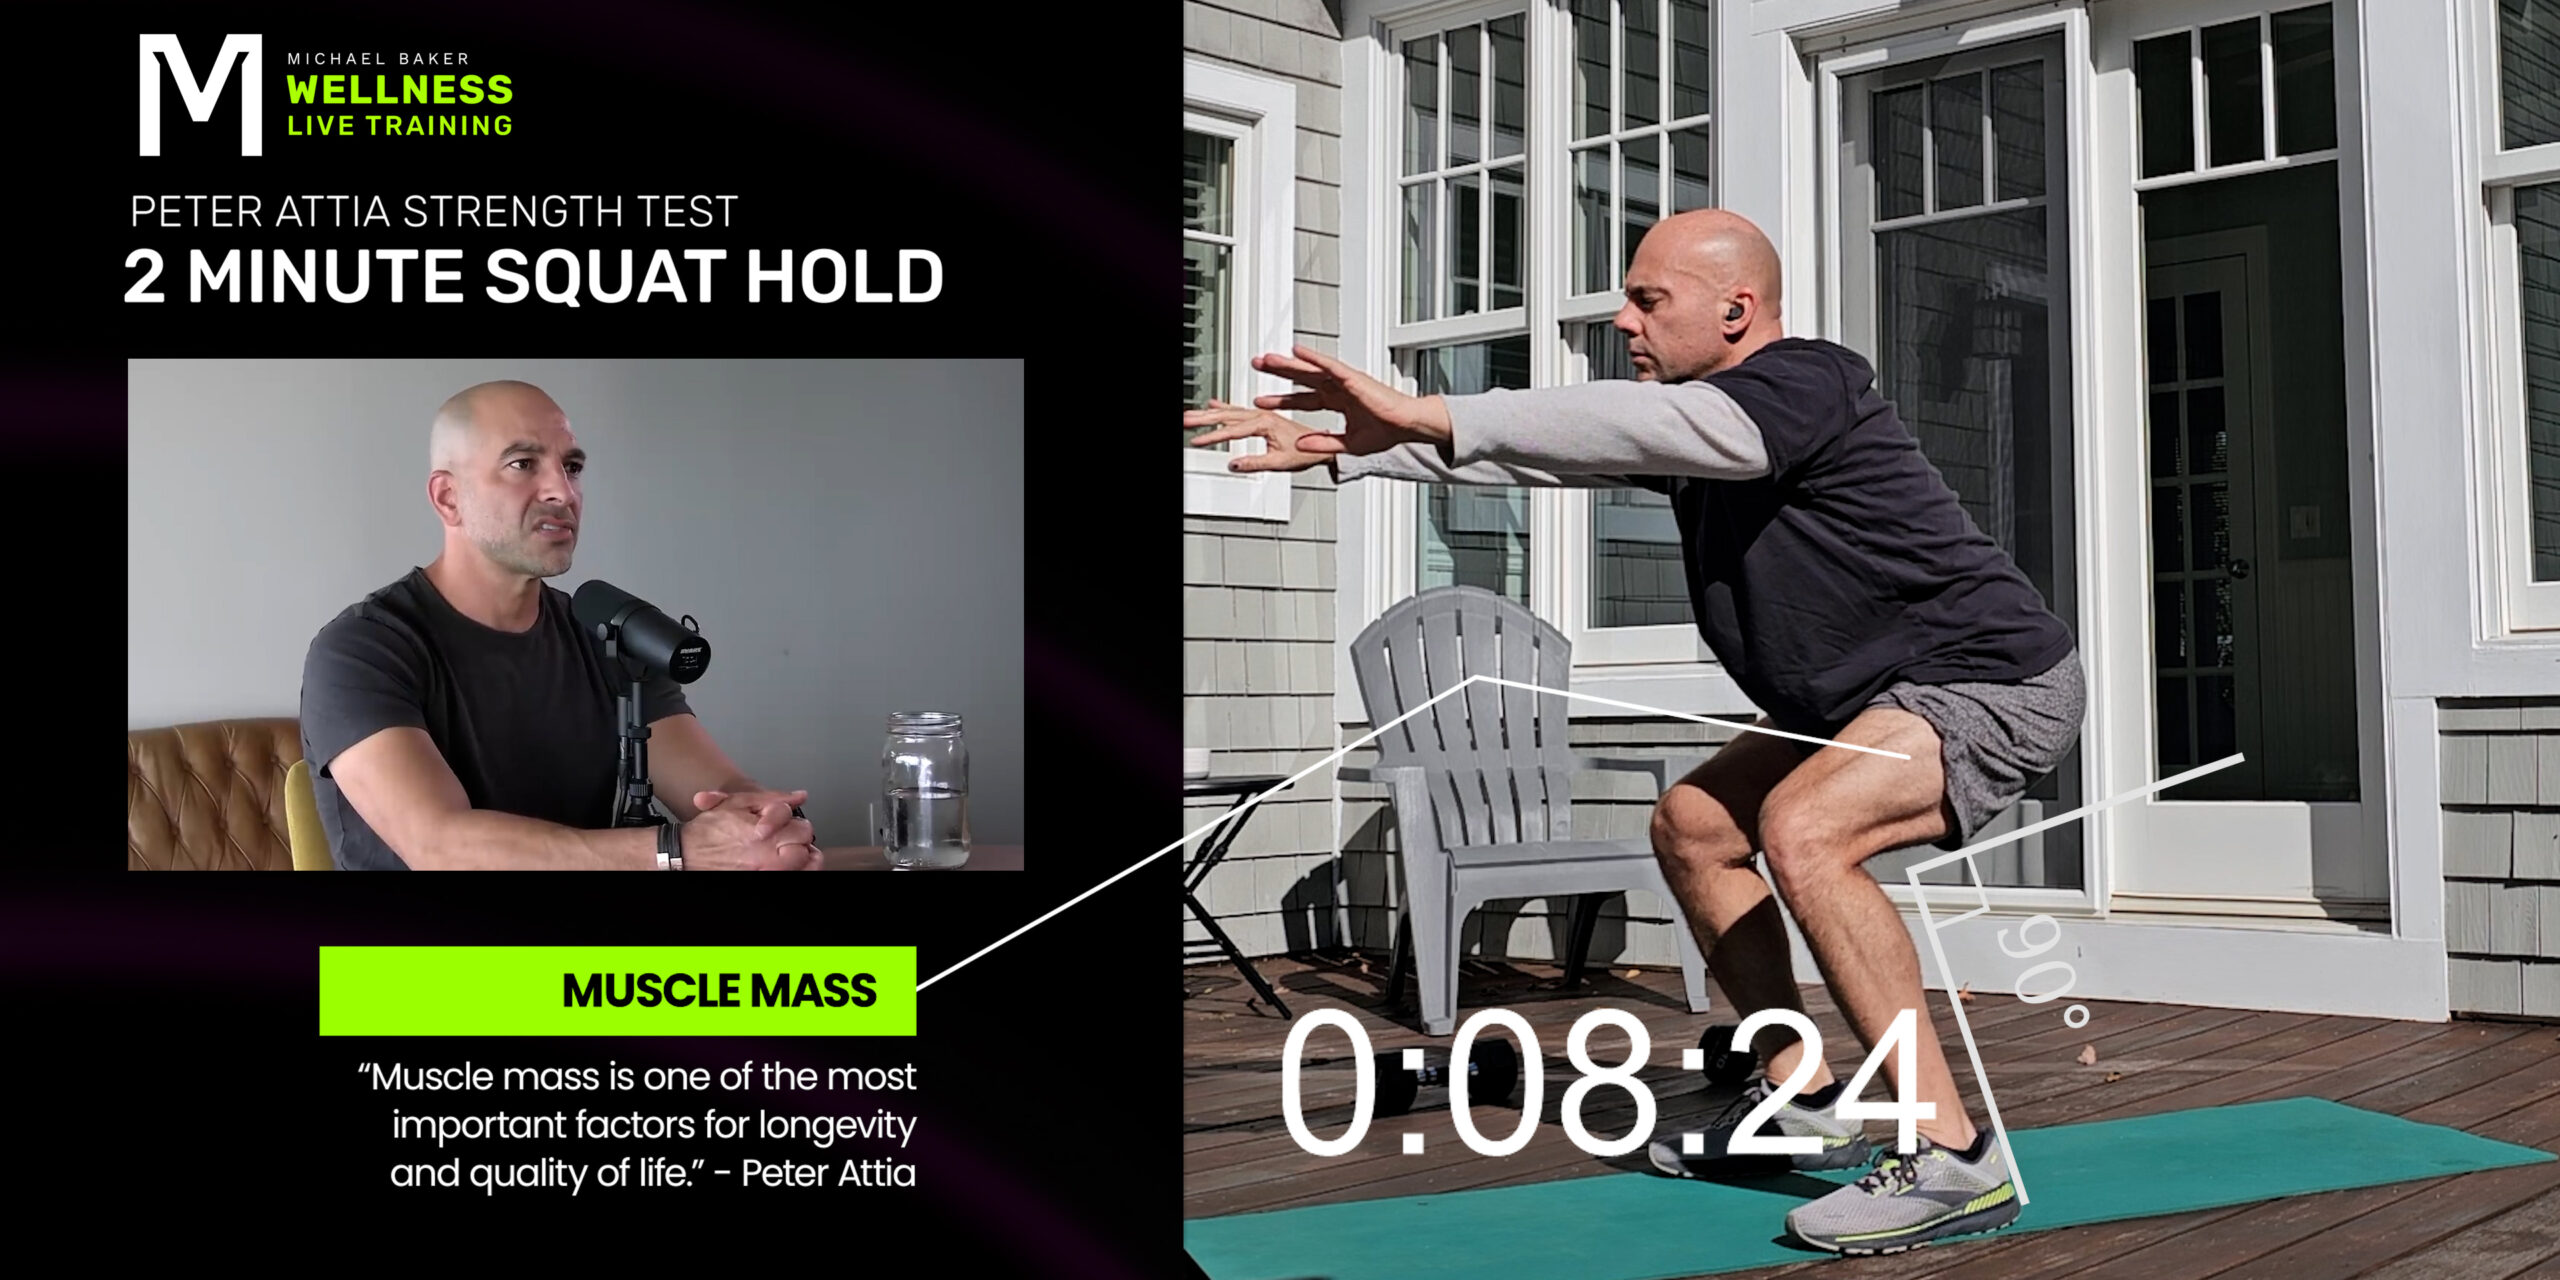 Featured image for “2 Minute Squat Hold – Peter Attia Longevity Strength Test for Over 40 Years Old”